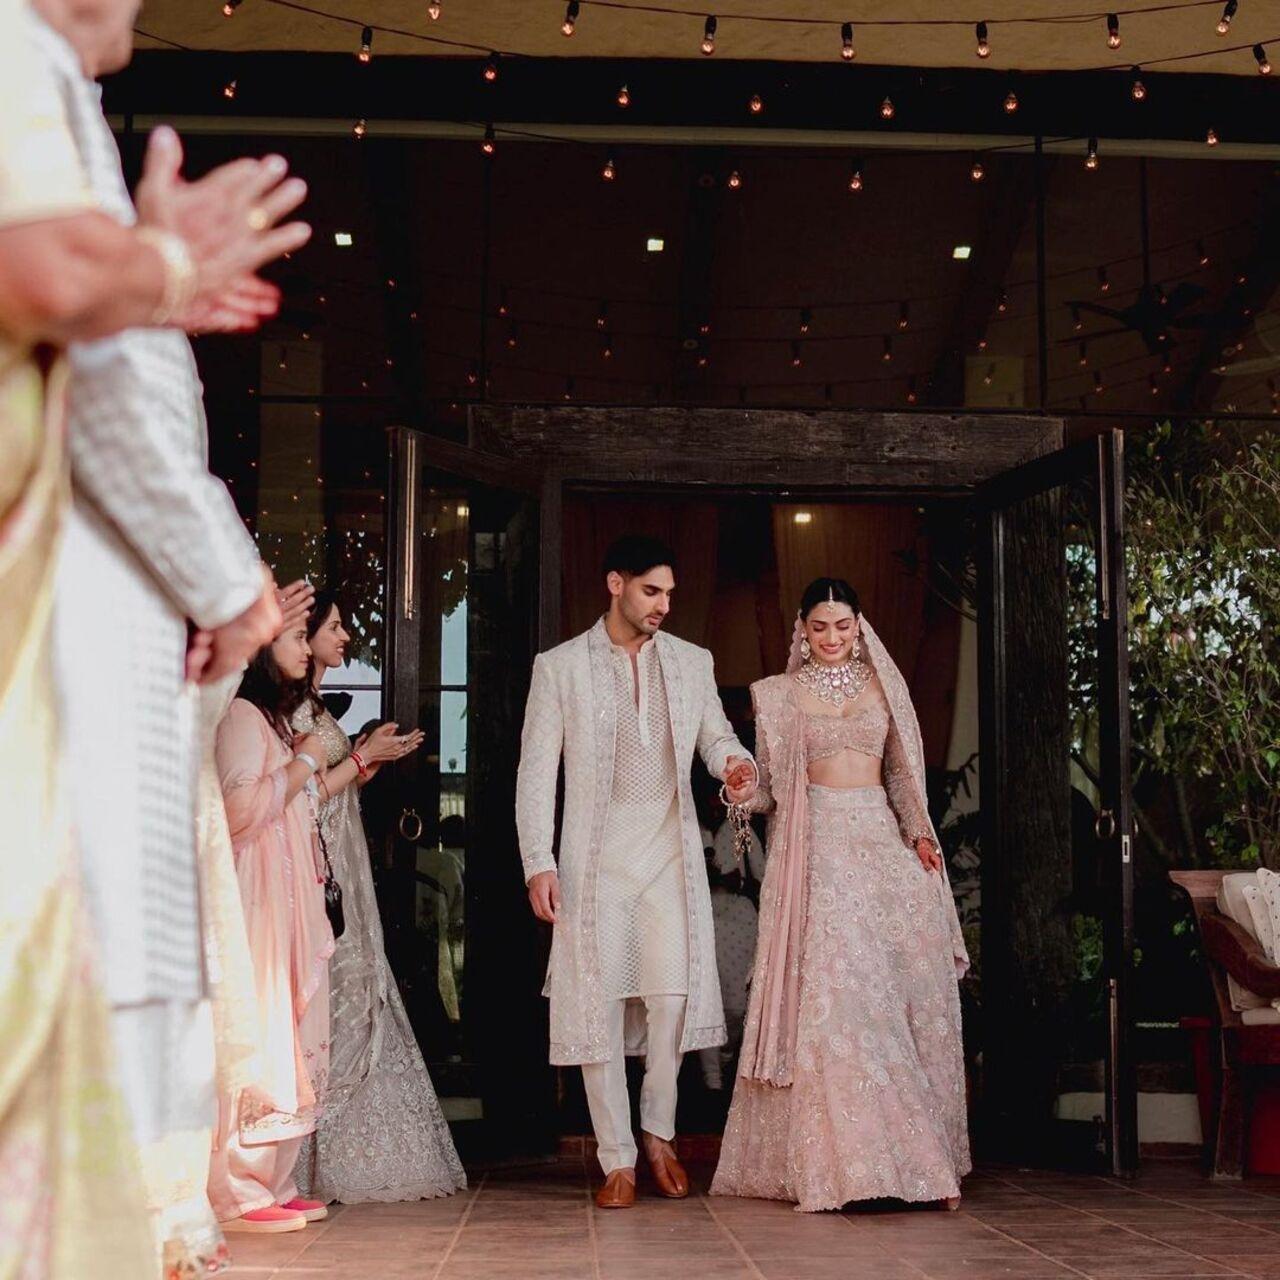 Athiya Shetty's younger brother, Ahan Shetty, walked her down the aisle at her wedding with KL Rahul in January this year